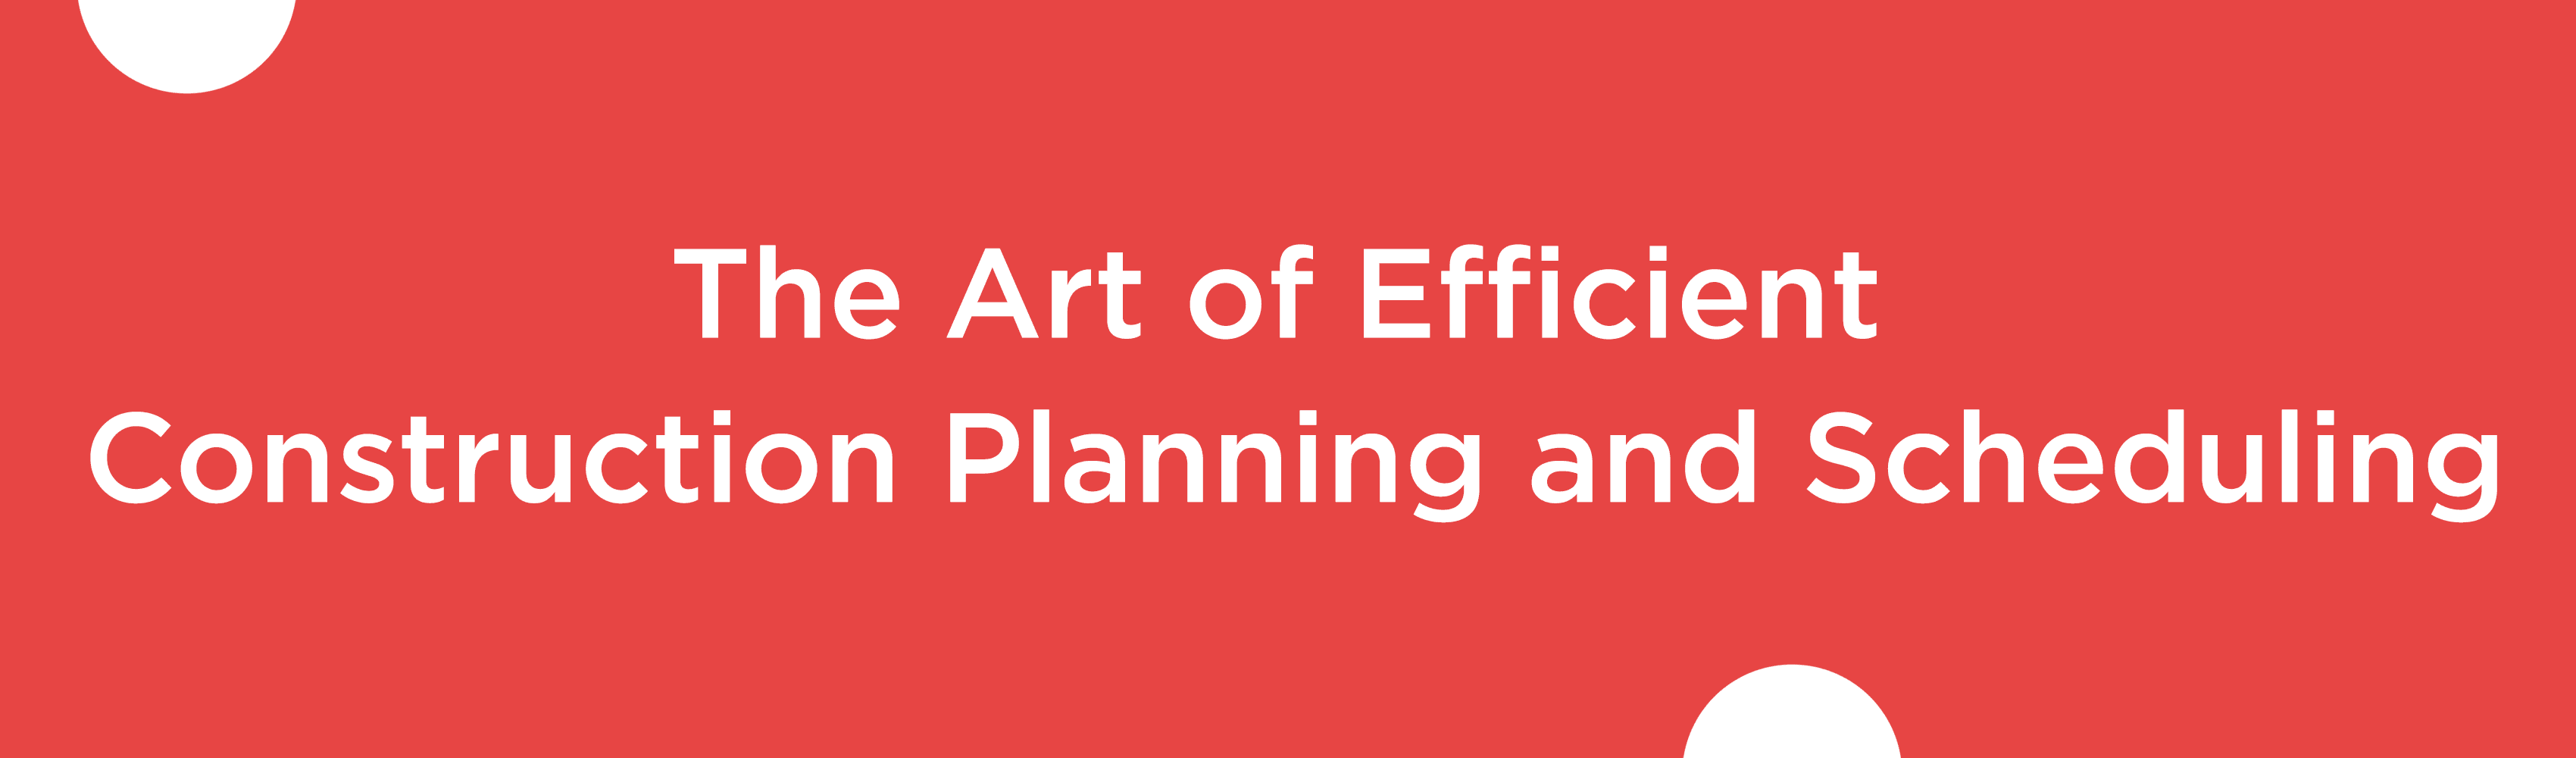 The Art of Efficient Construction Planning and Scheduling